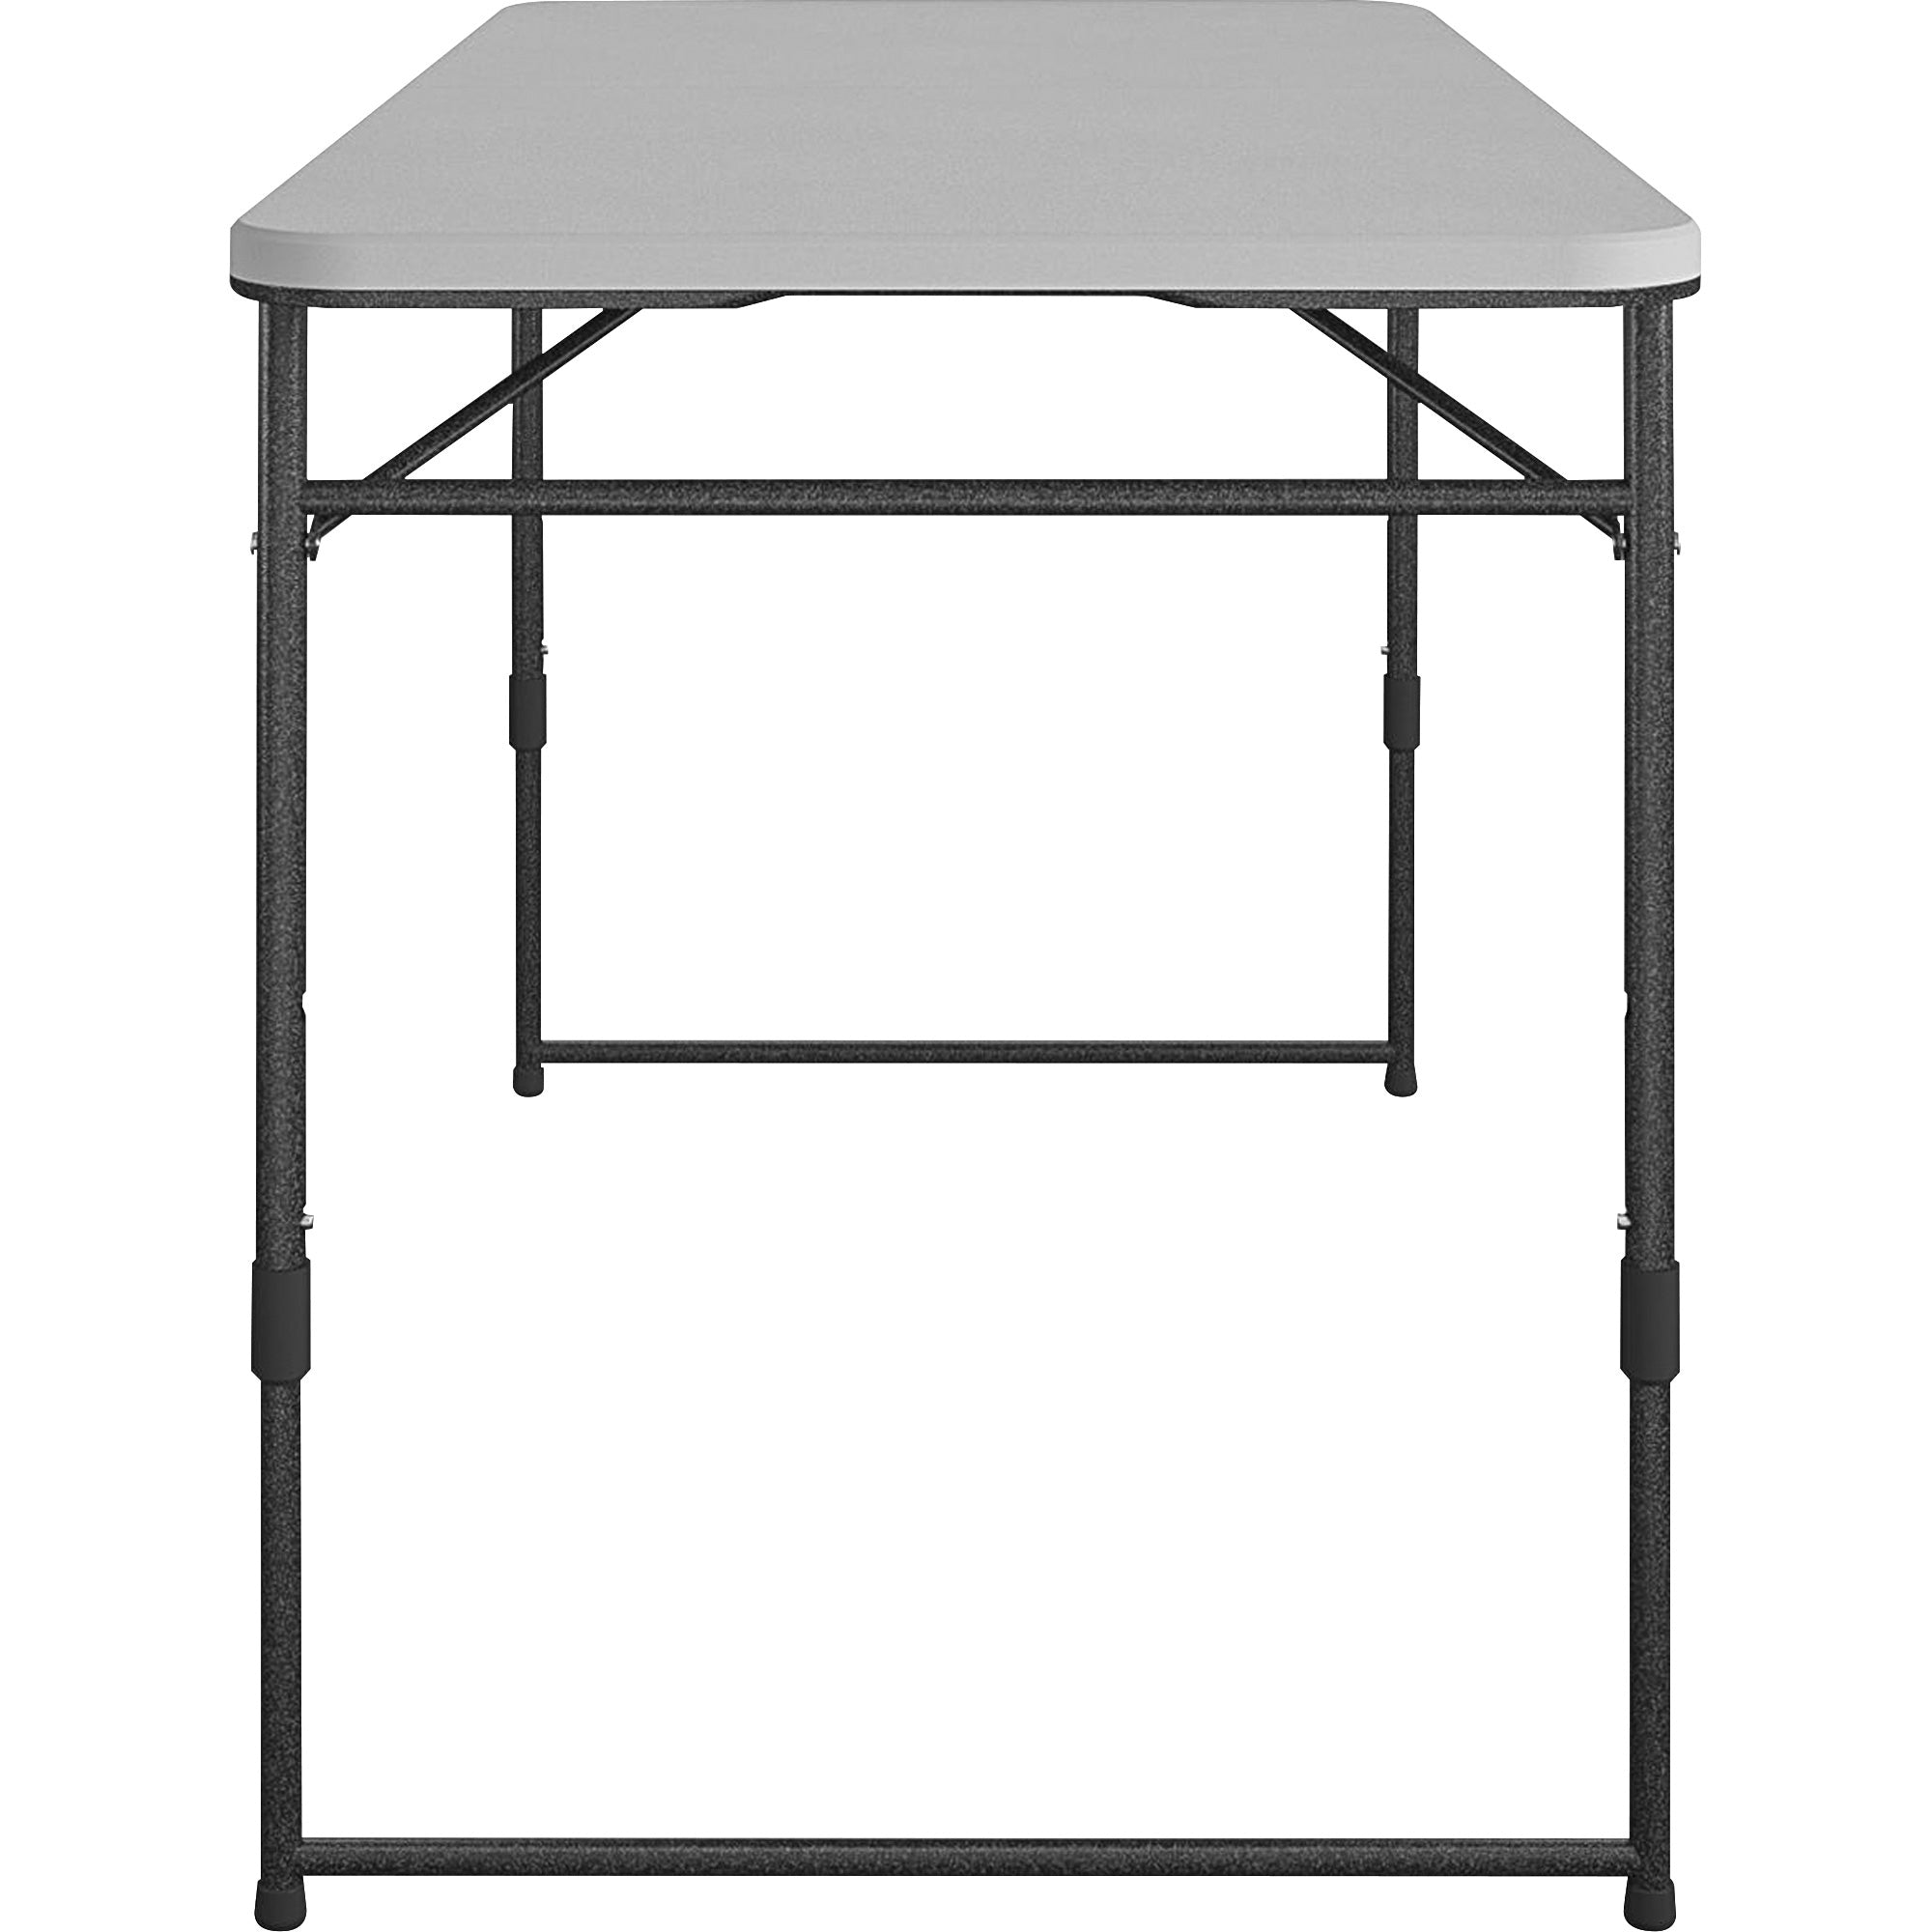 cosco-fold-portable-indoor-outdoor-utility-table-200-lb-capacity-adjustable-height-x-48-table-top-width-x-24-table-top-depth-28-height-gray-steel-resin-1-each_csc14400gry1e - 4